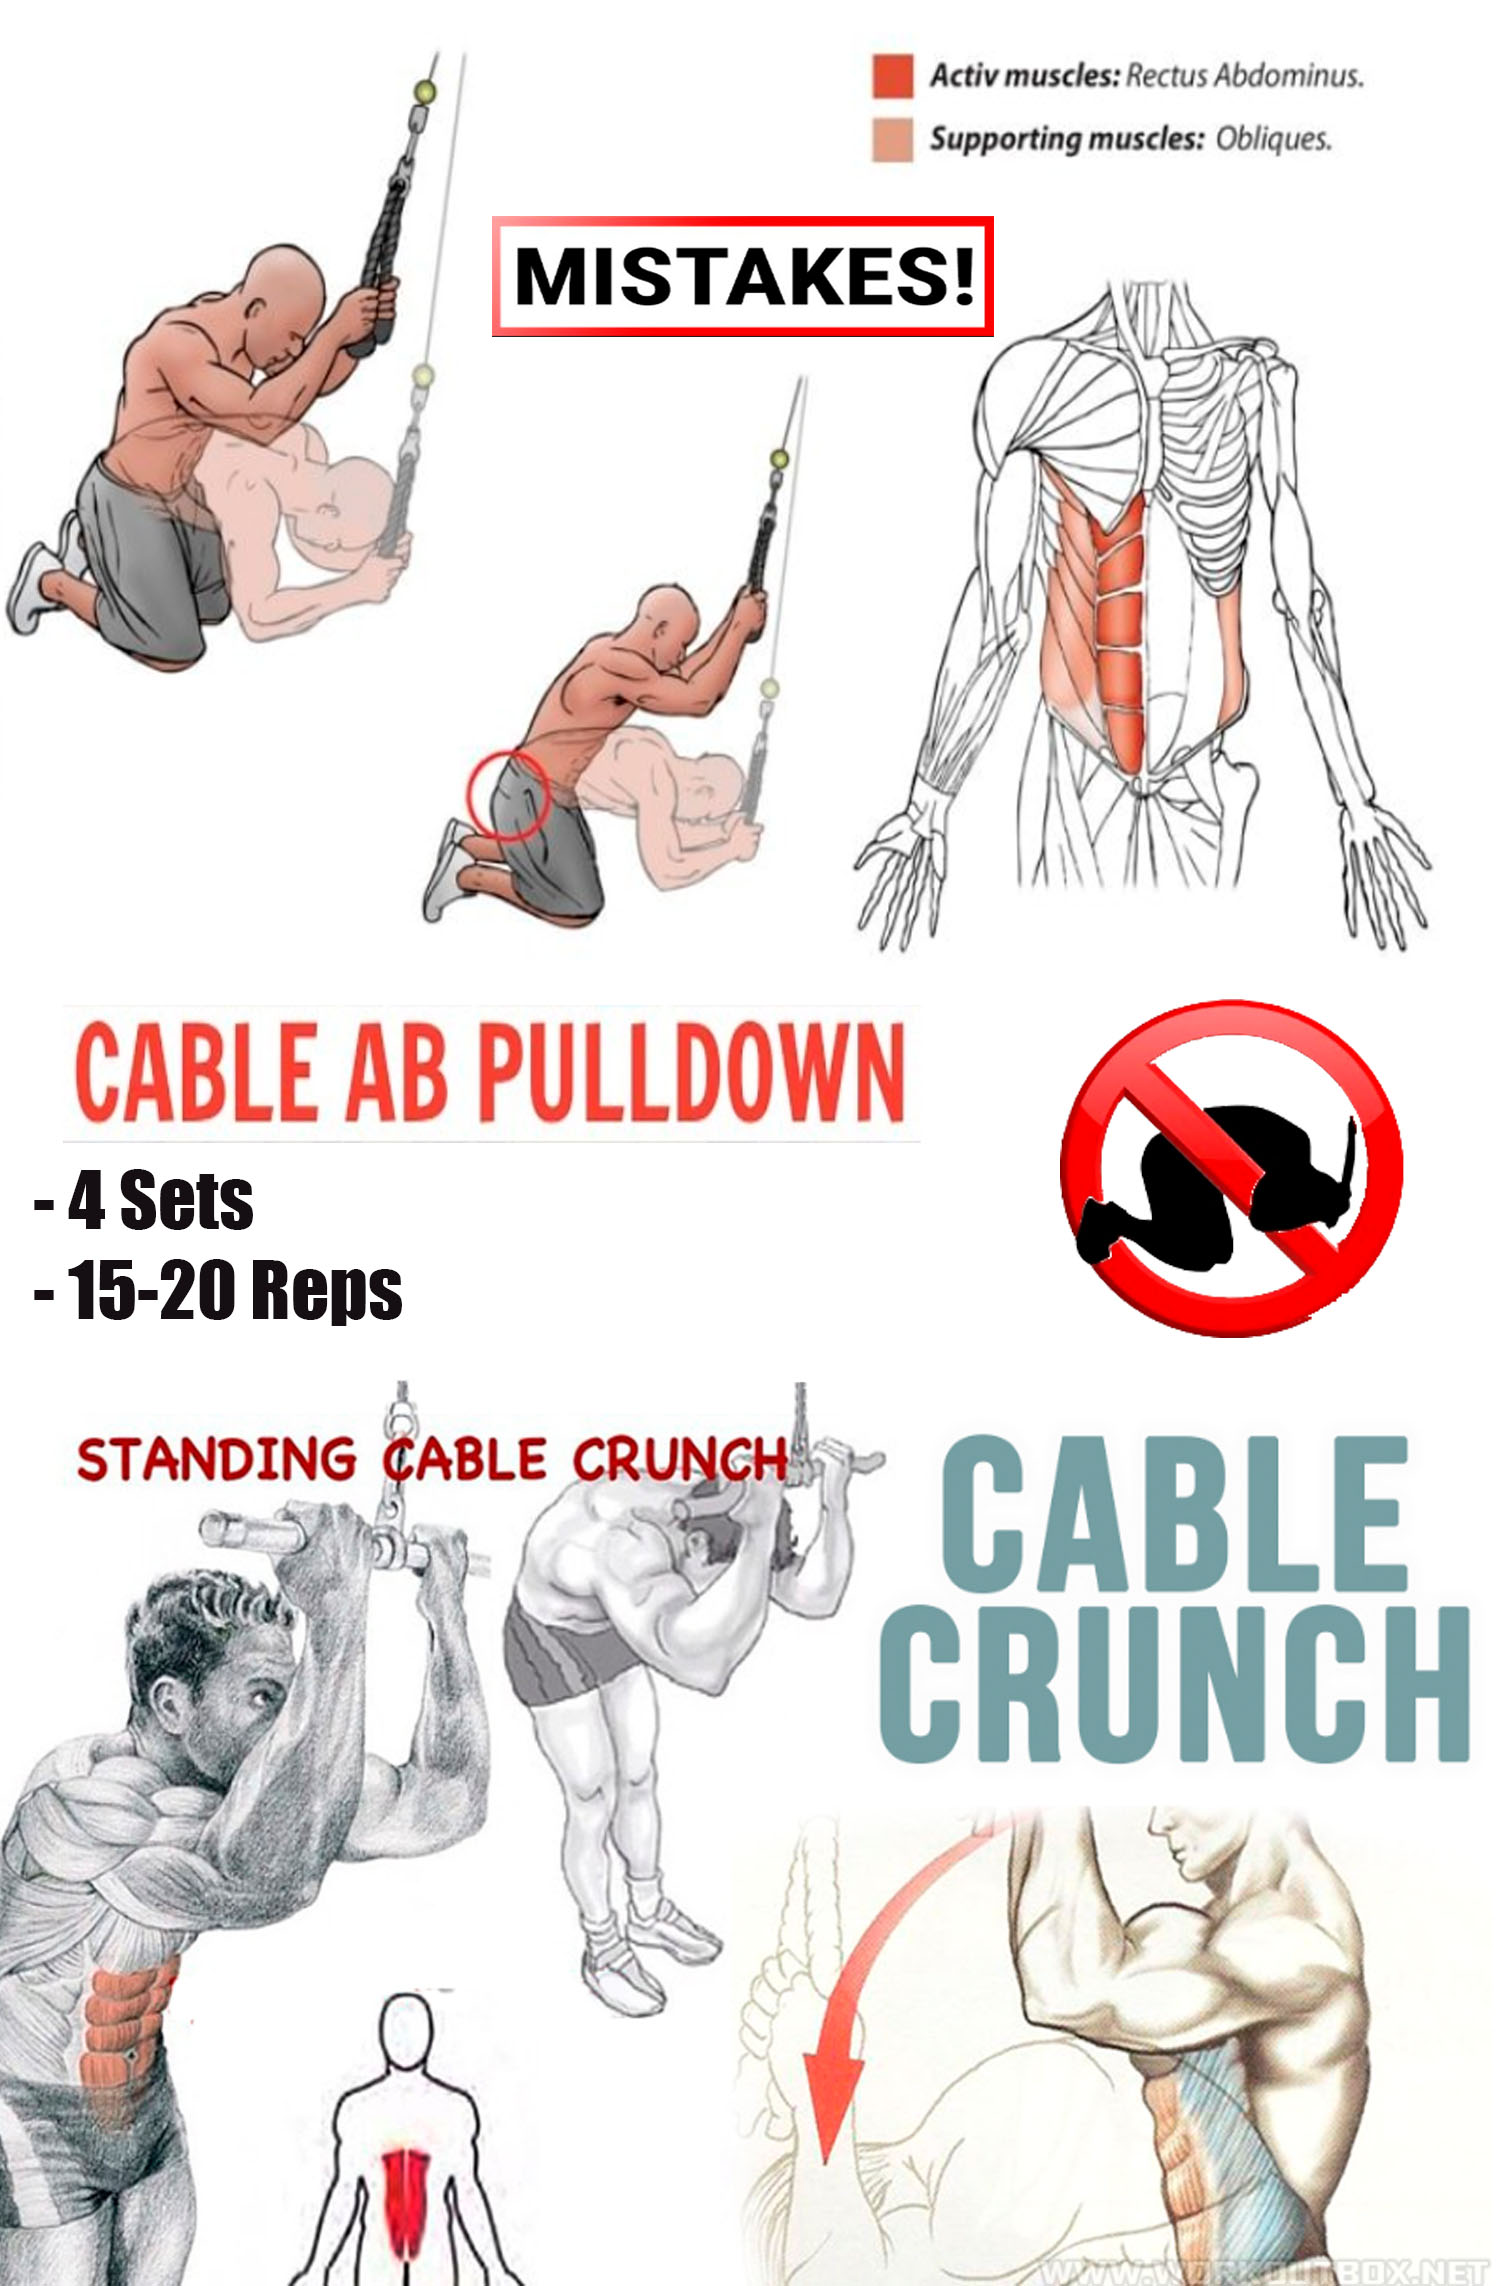 Cable crunches 